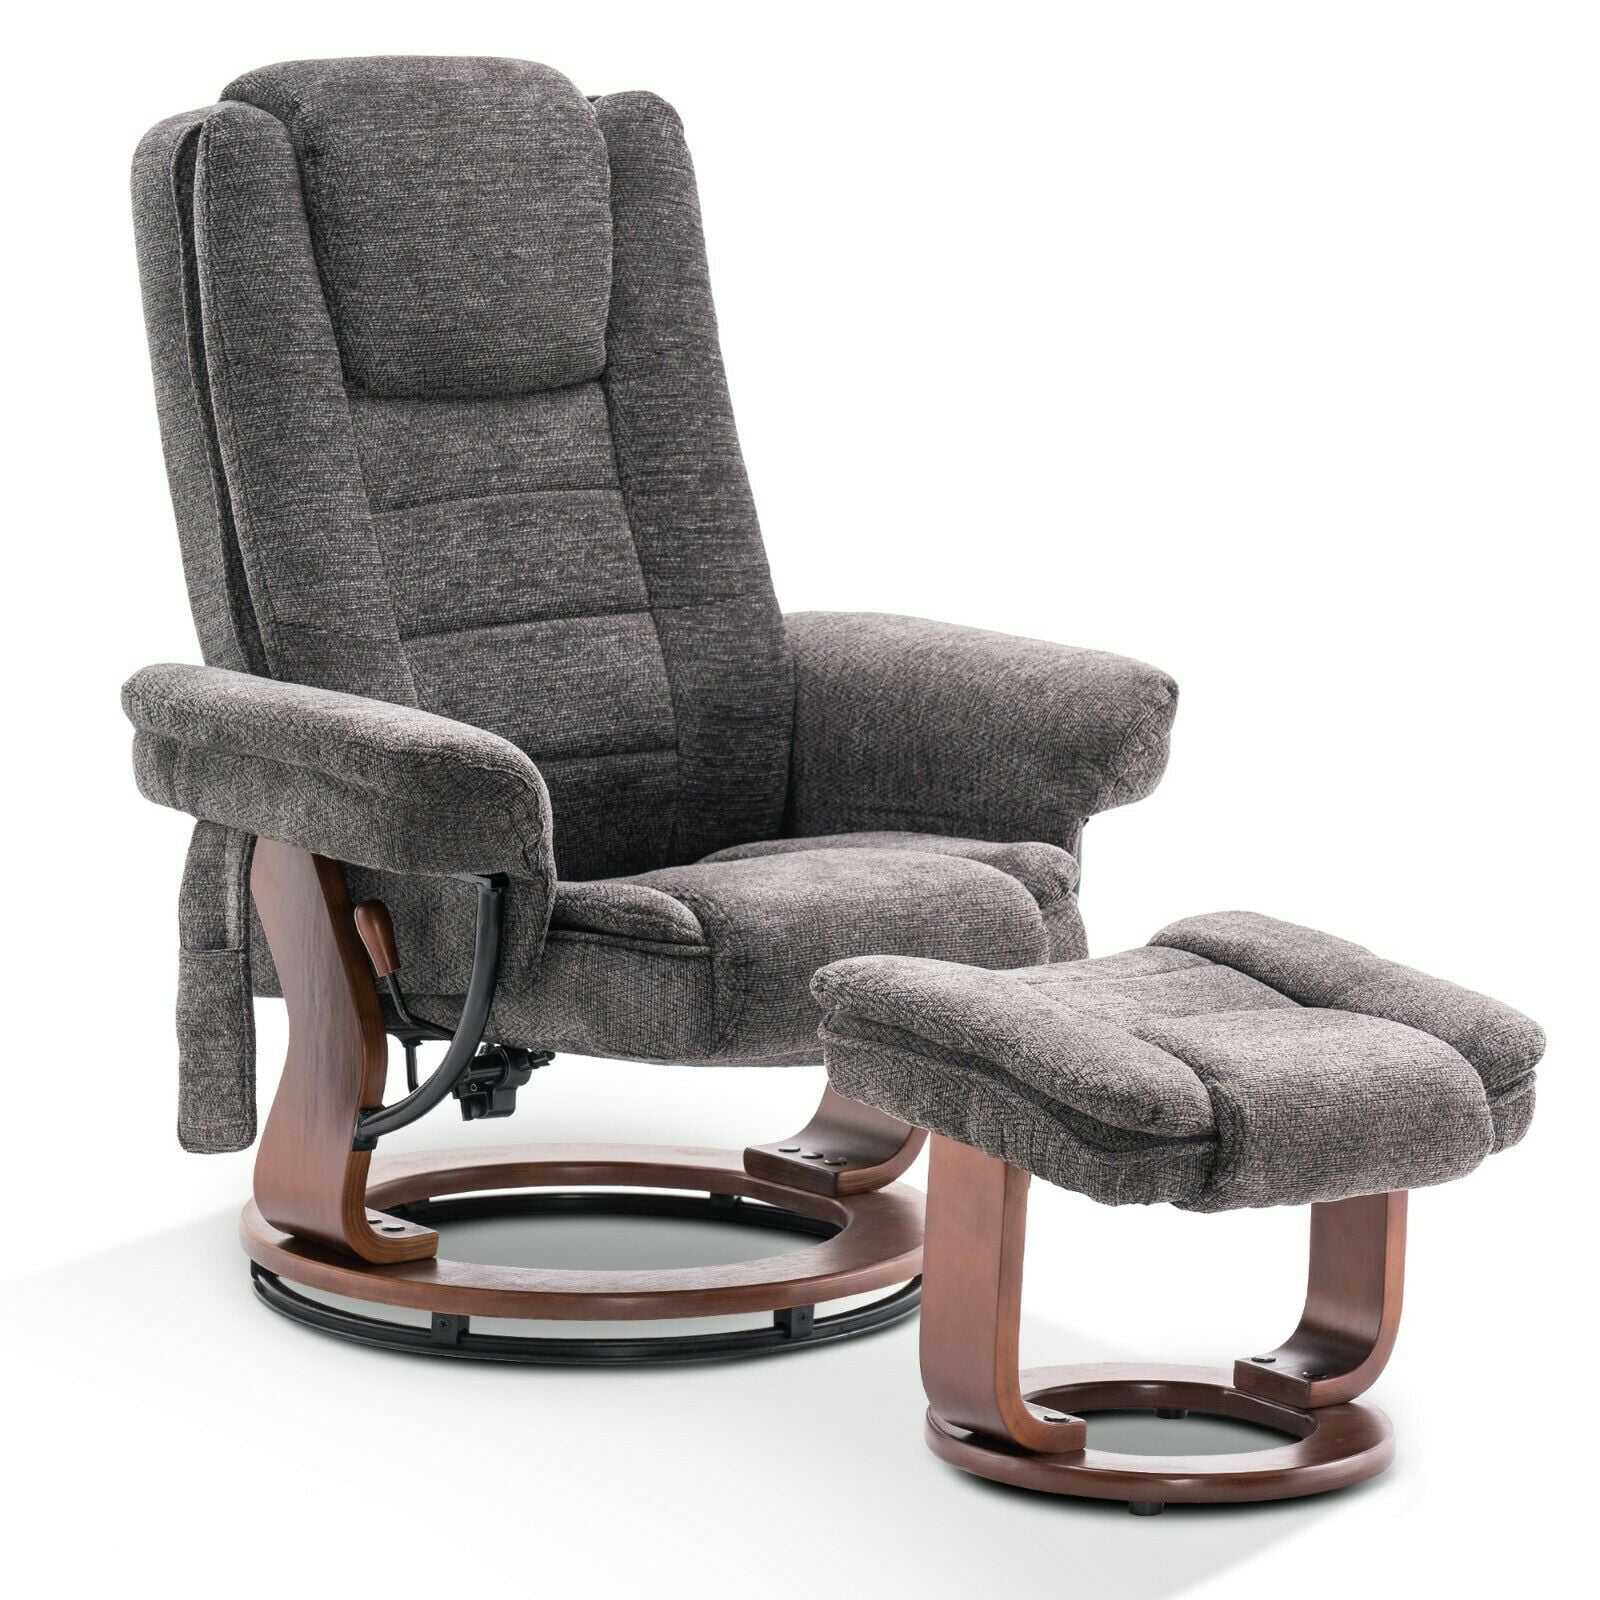 Recliner Chair with Ottoman, Fabric Accent Chair